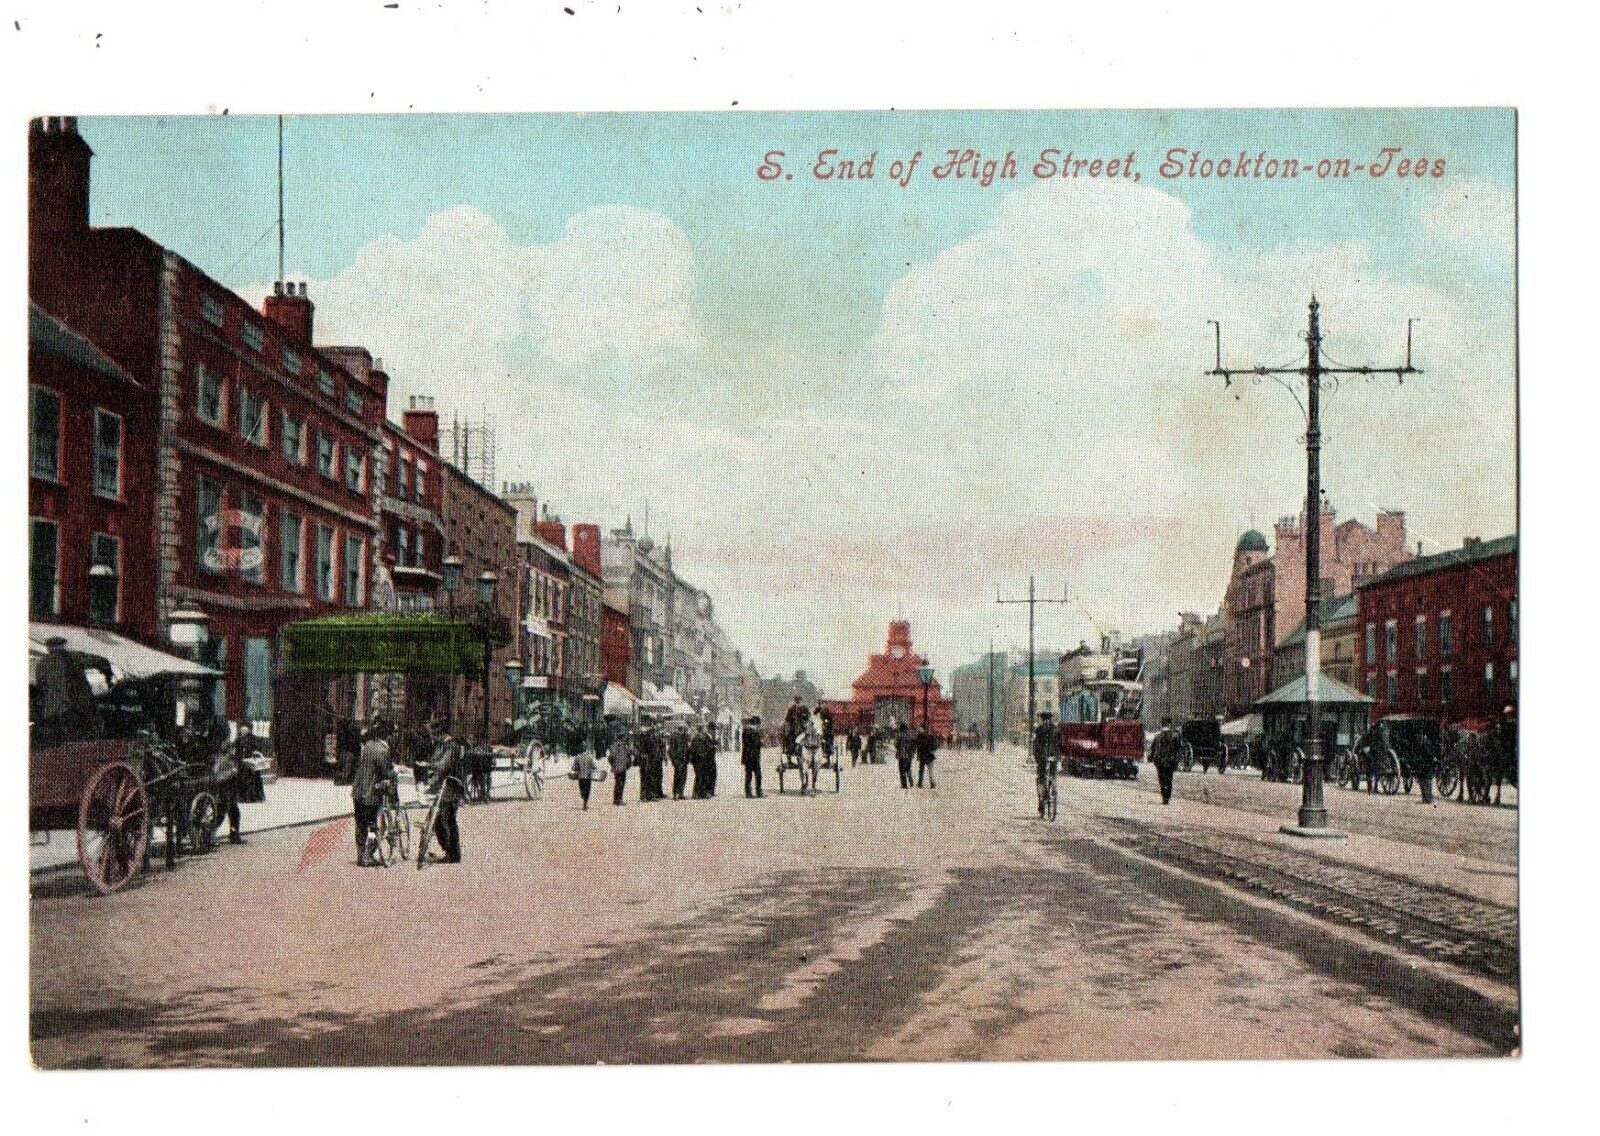 House Clearance - SOUTH END OF HIGH STREET - STOCKTON - UNPOSTED - " JL10 "